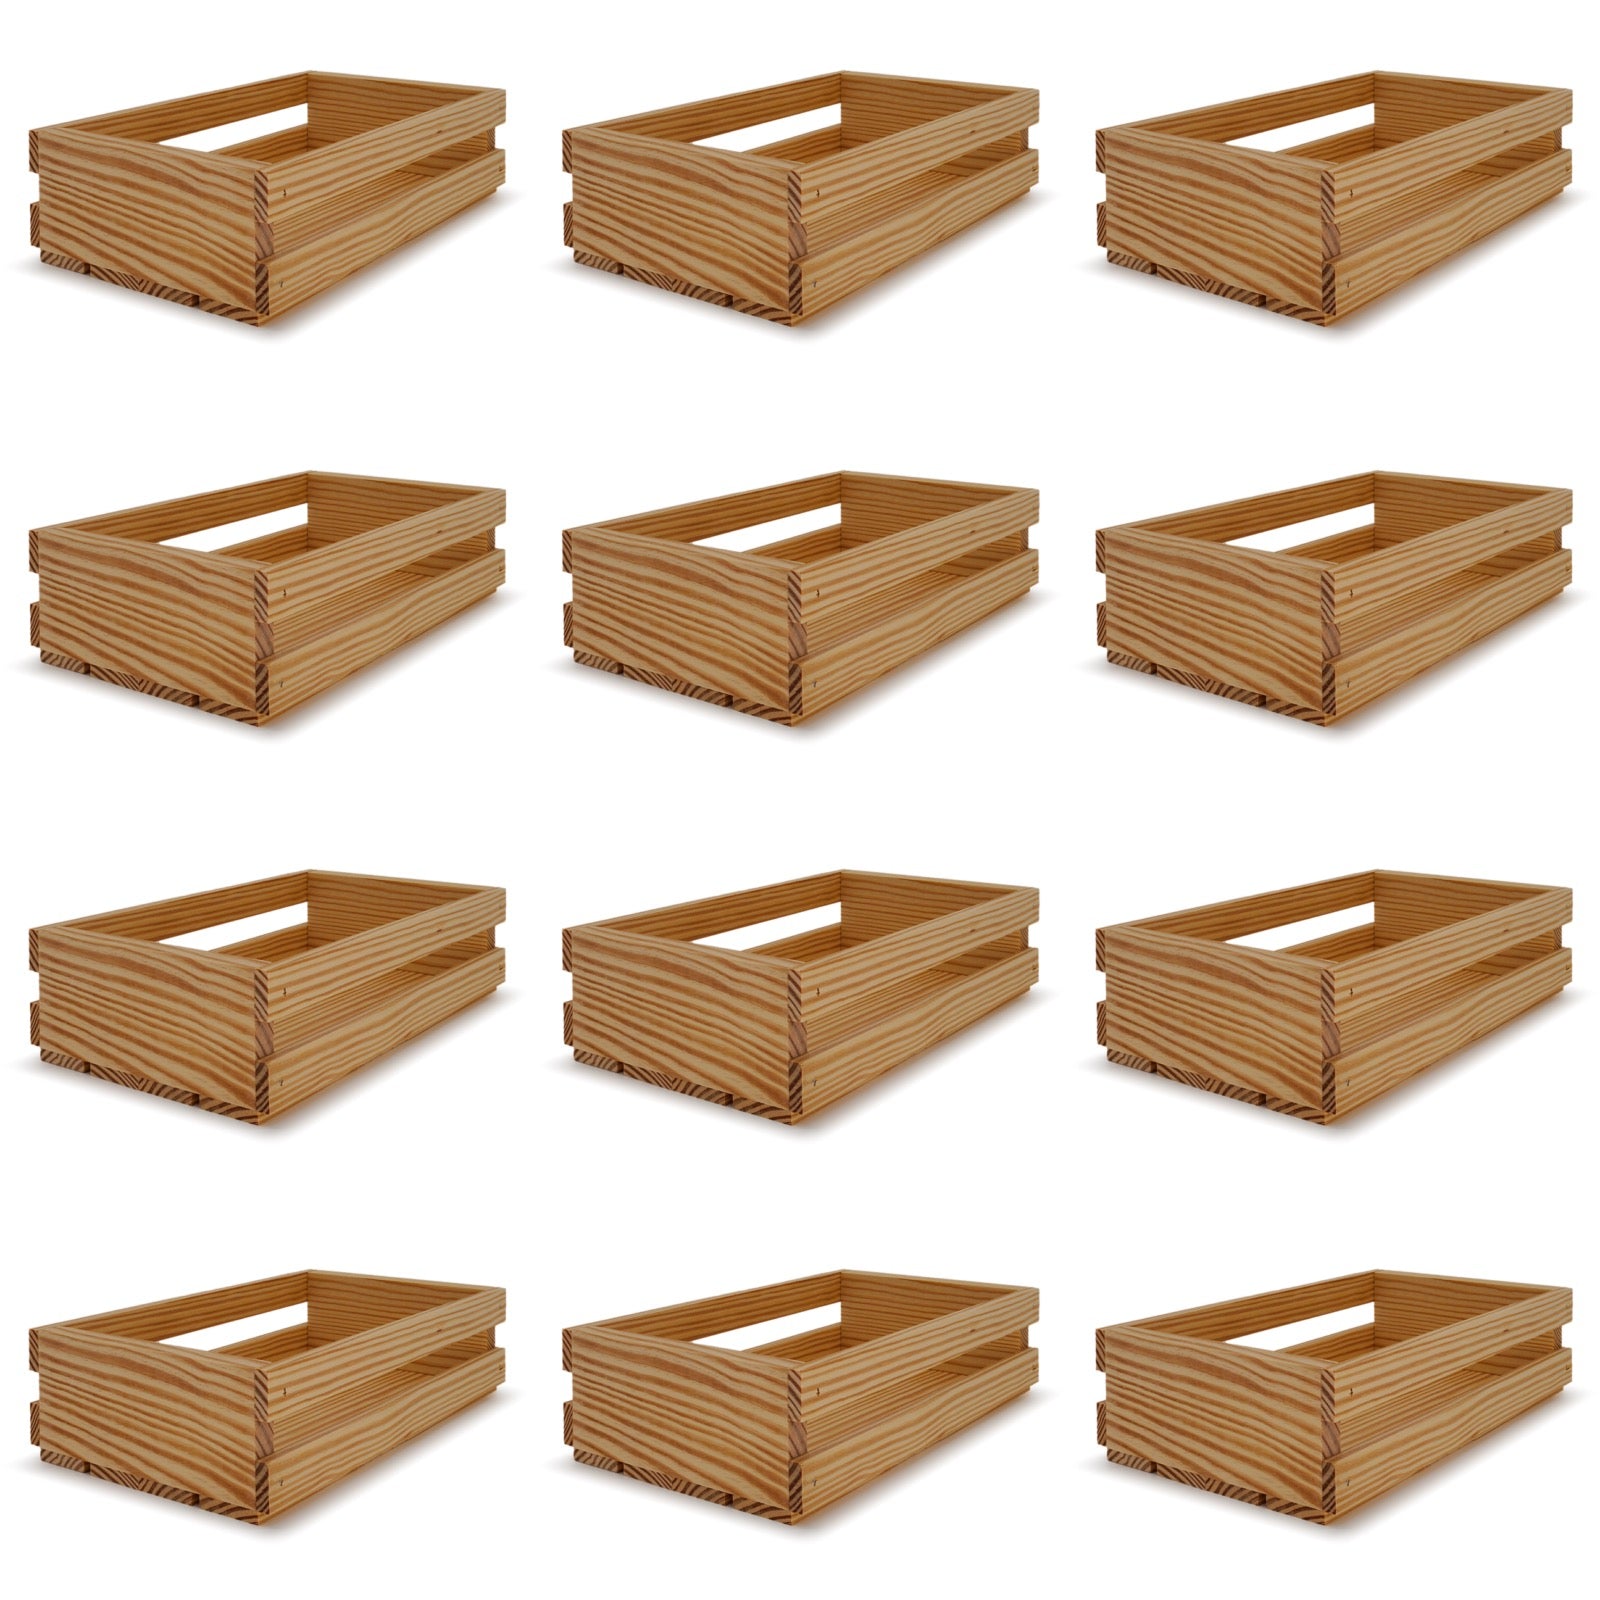 12 Small wooden crates 13x7.5x3.5